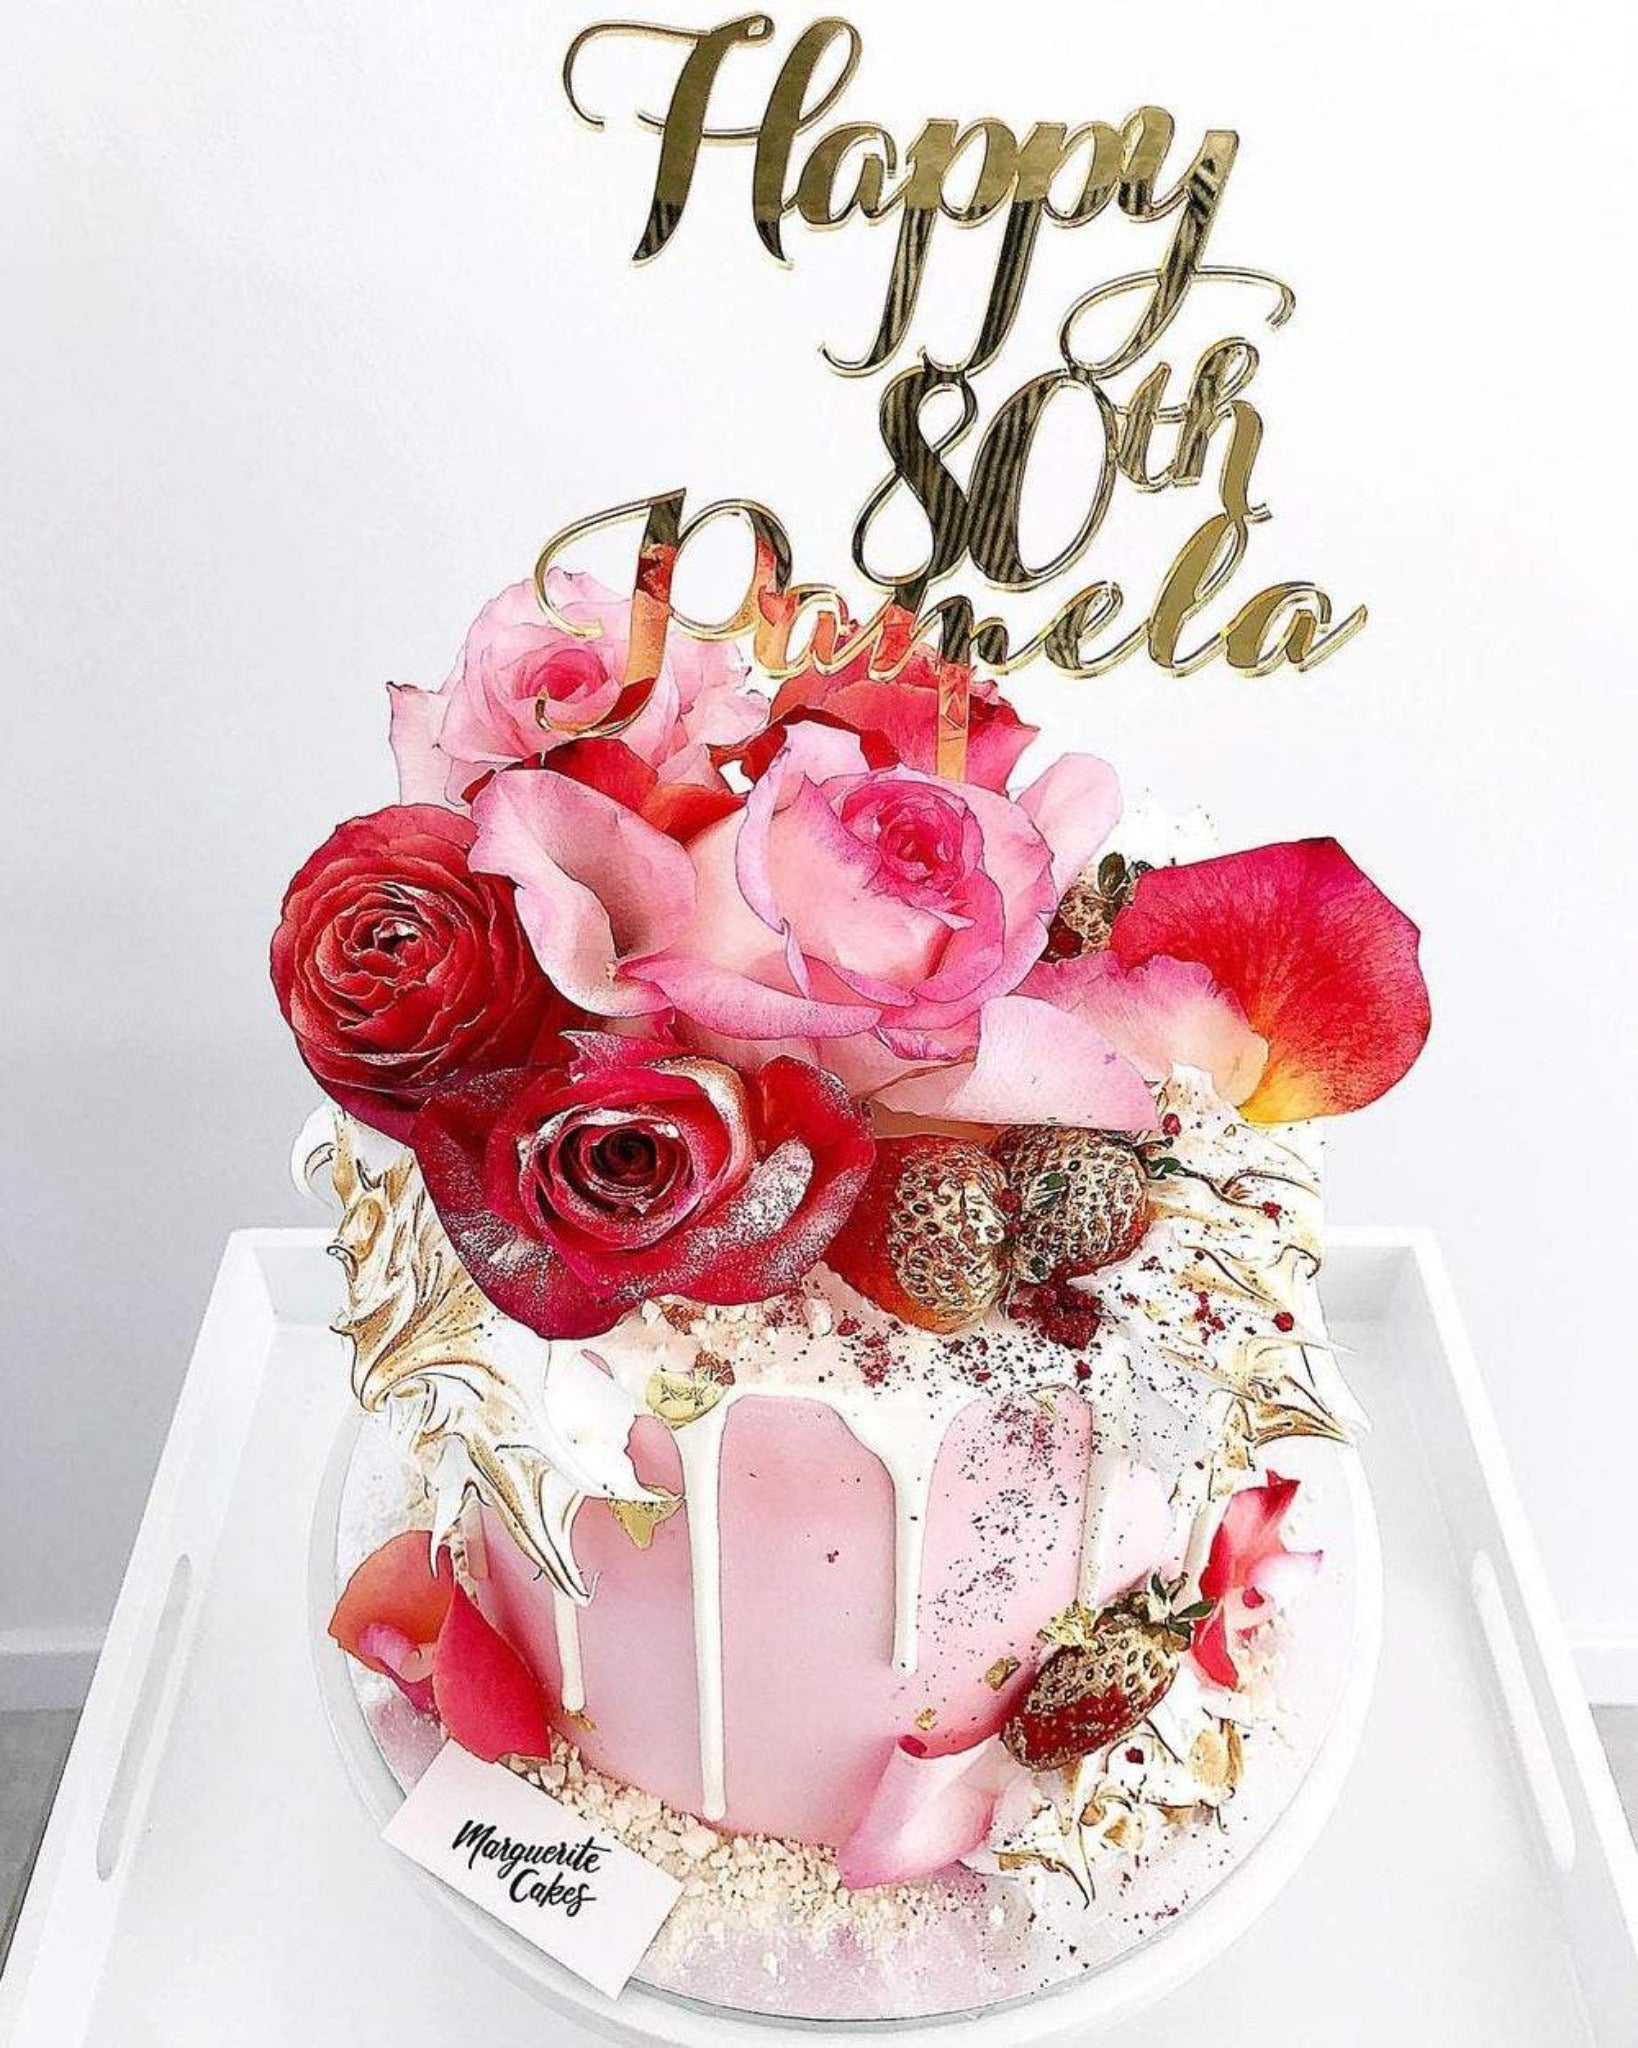 Personalised 80th Birthday Cake Topper By Allihopa | notonthehighstreet.com